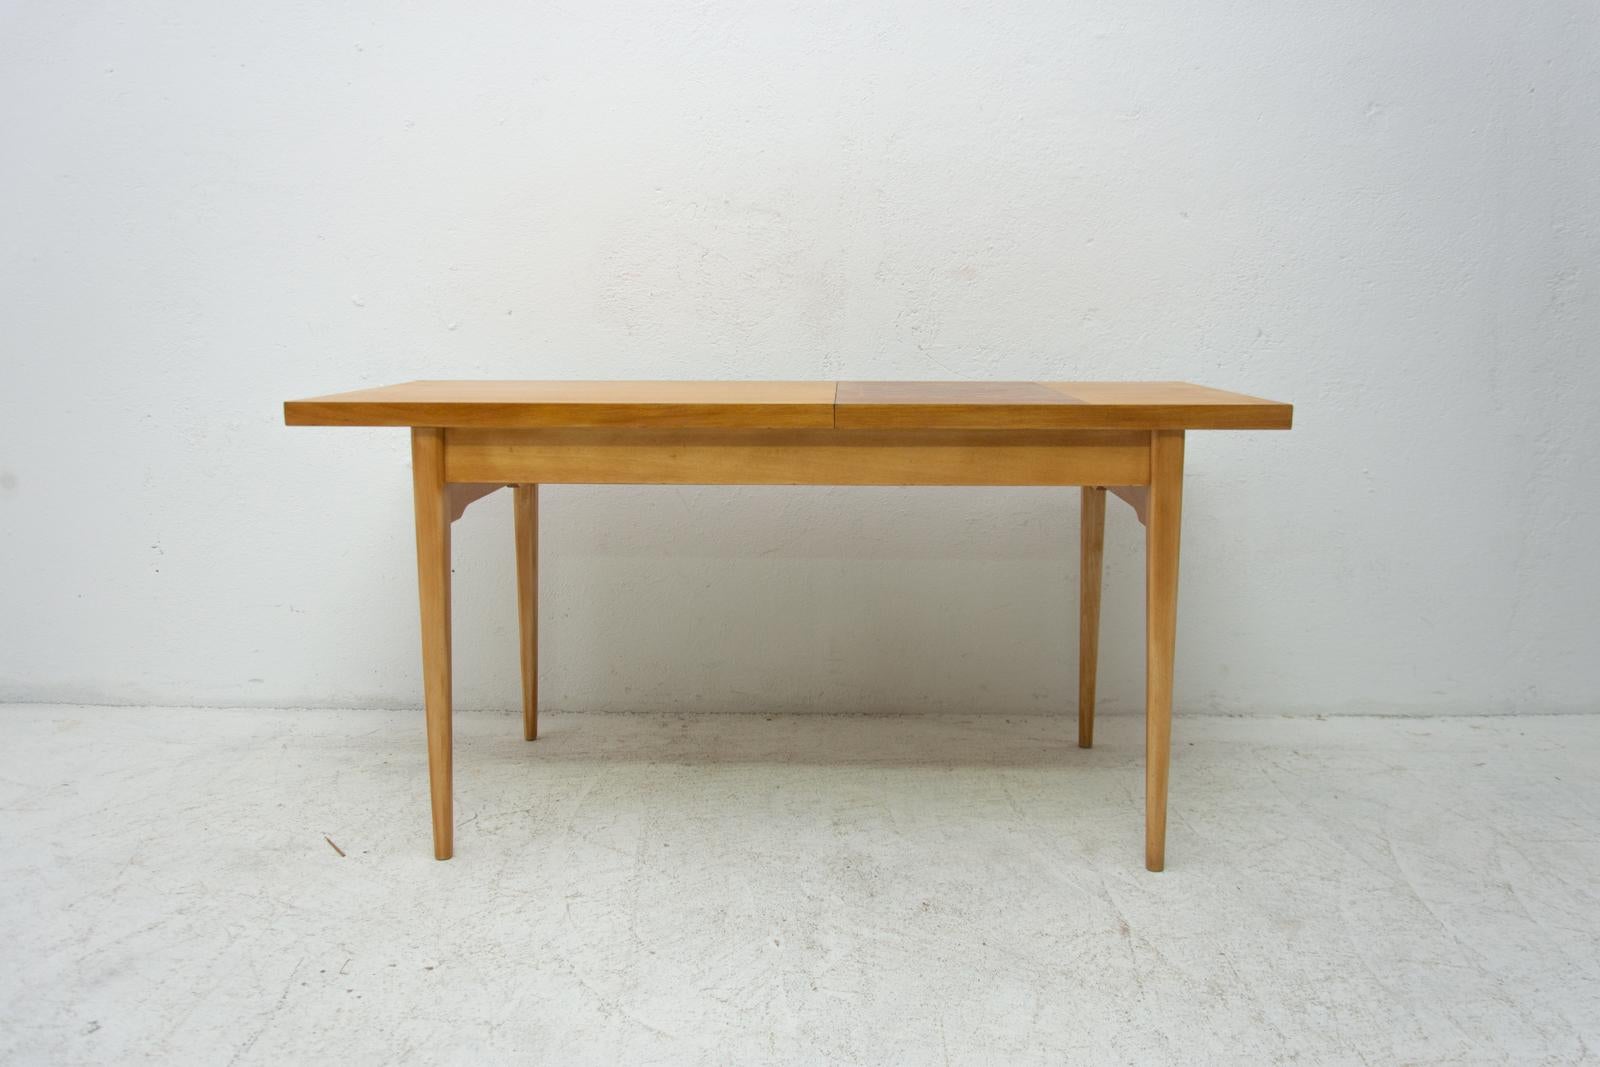 This vintage coffee or side table was made in the former Czechoslovakia by Hikor Písek company in the 1960s. It´s made of beech wood and has a chess pattern on the board. Cool retro piece. In very good vintage condition, shows slight signs of age